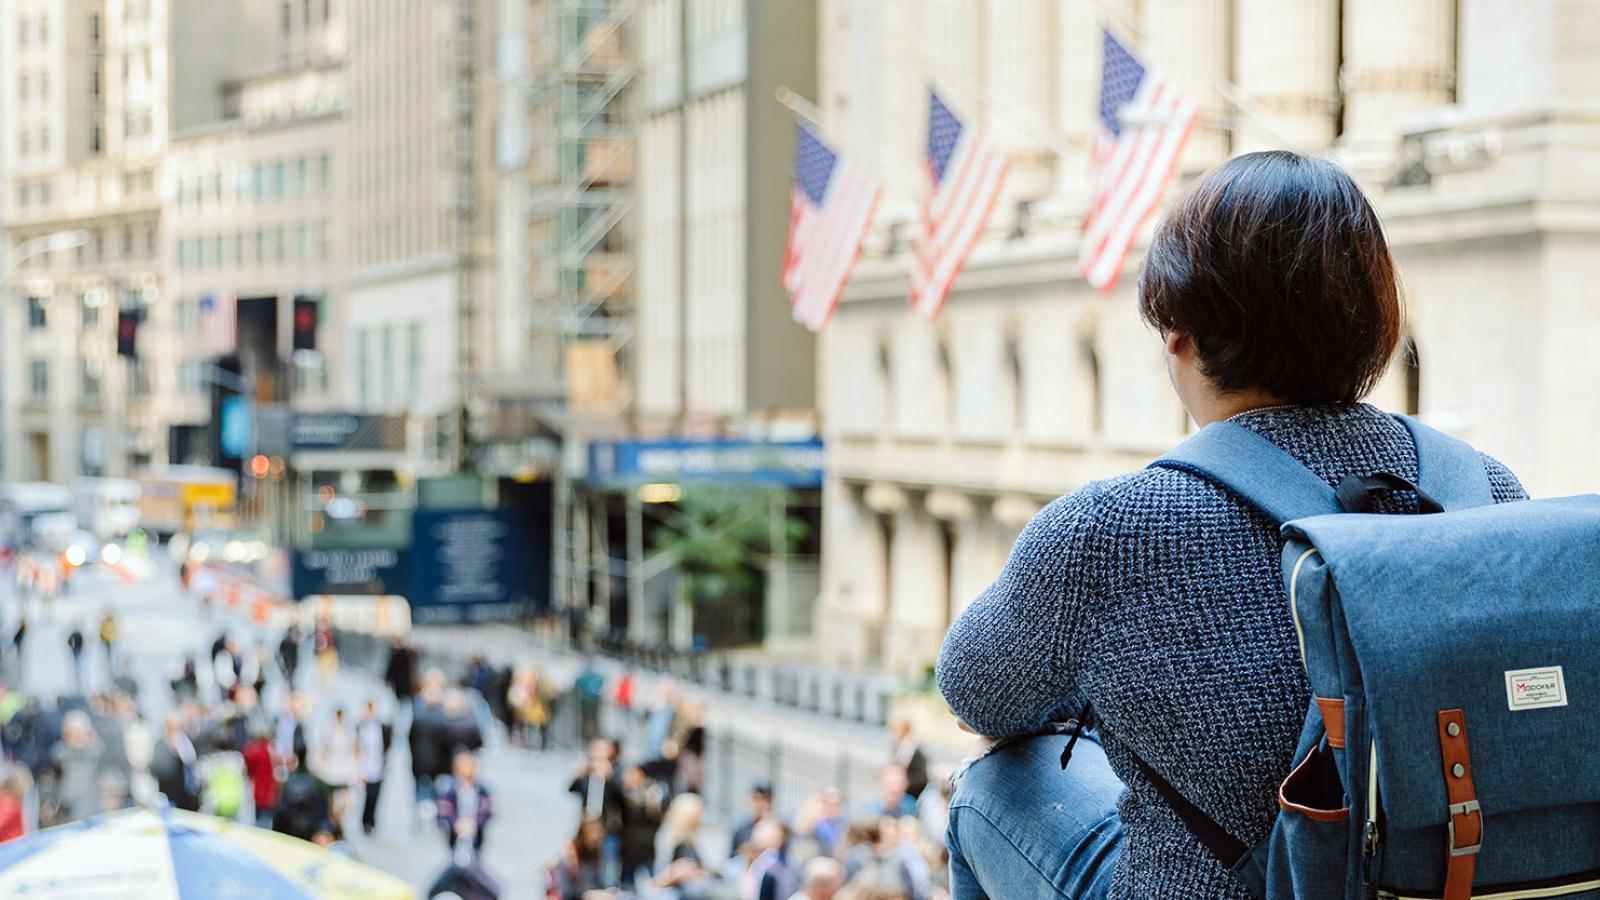 Pace student sitting on steps and looking out over Wall Street.